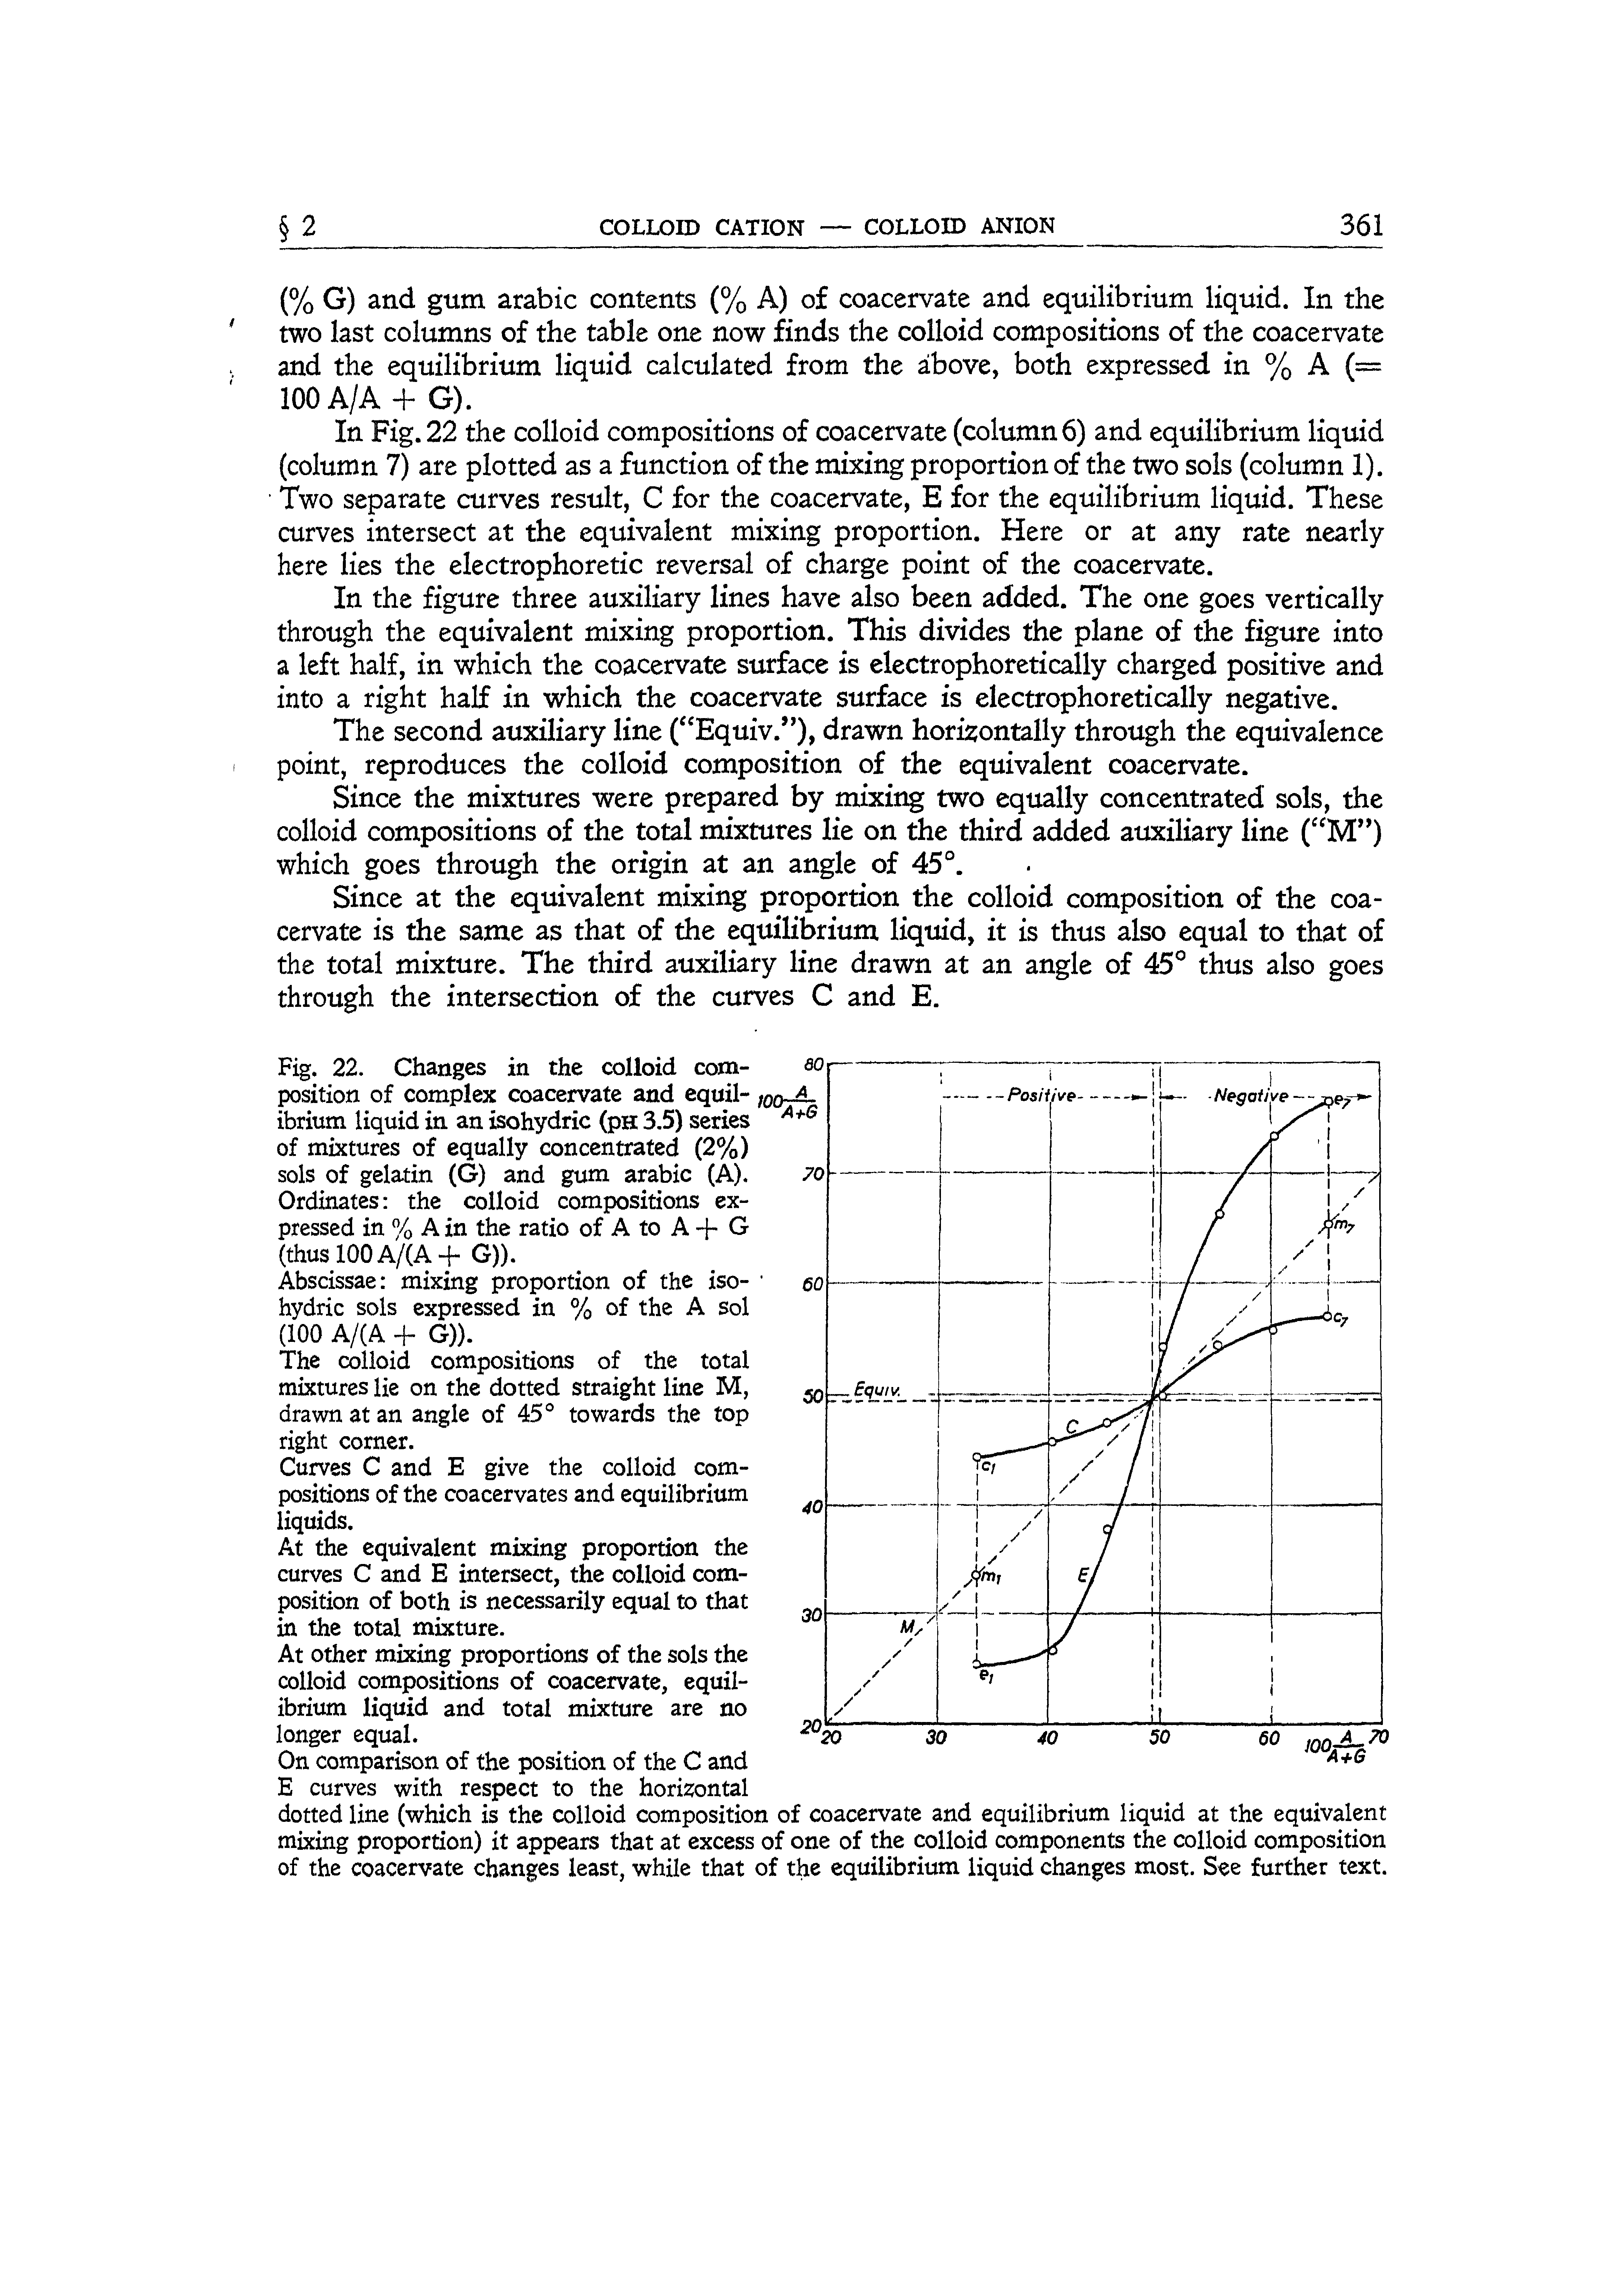 Fig. 22. Changes in the colloid composition of complex coacervate and equil- ibrium liquid in an isohydric (pH 3.5) series of mixtures of equally concentrated (2%) sols of gelatin (G) and gum arabic (A).